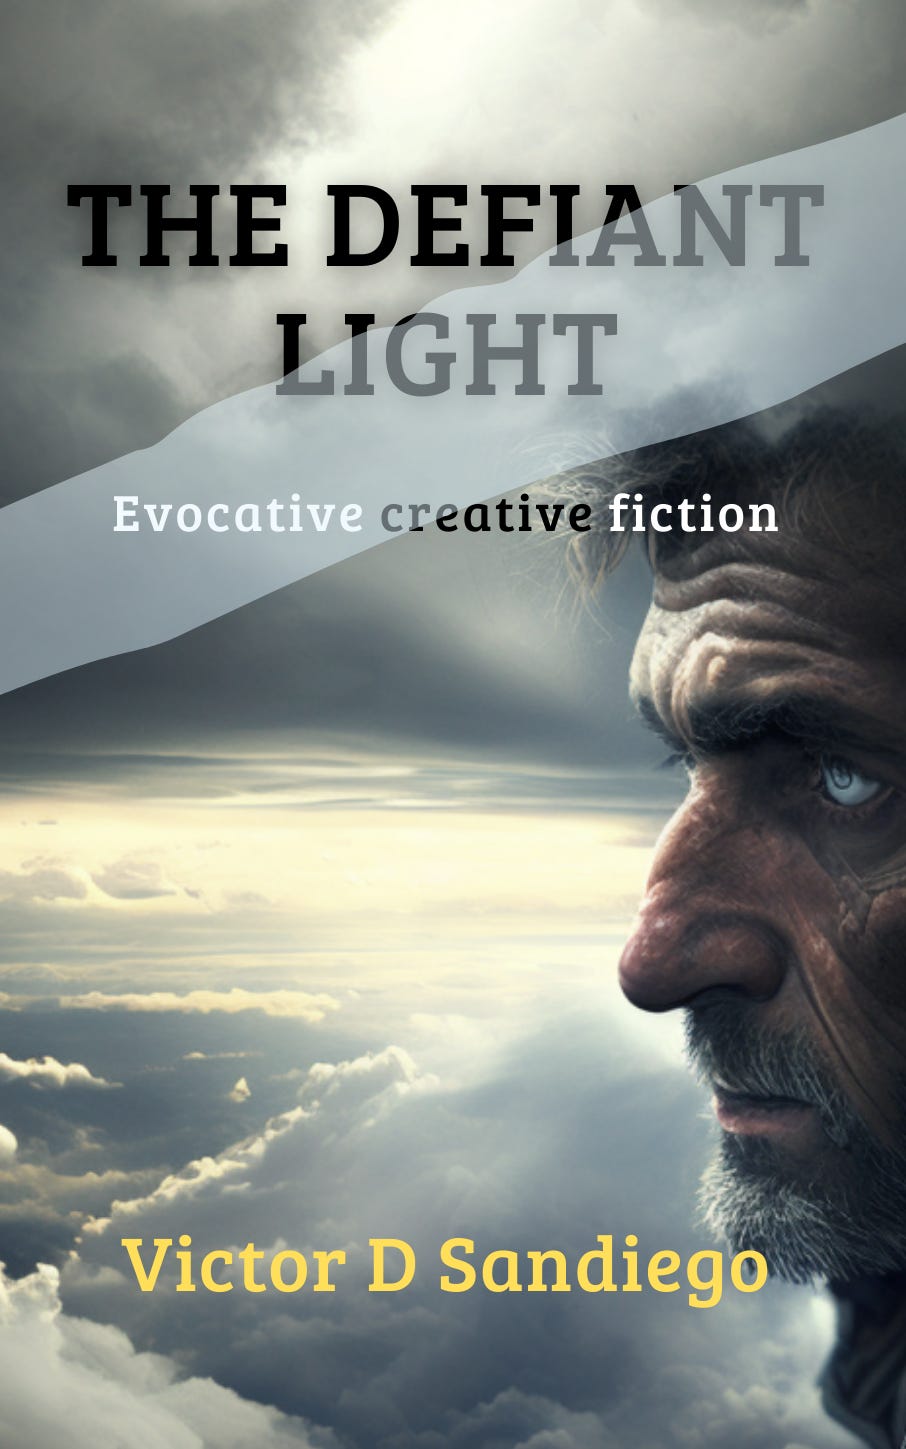 Cover image of my book, The Defiant Light